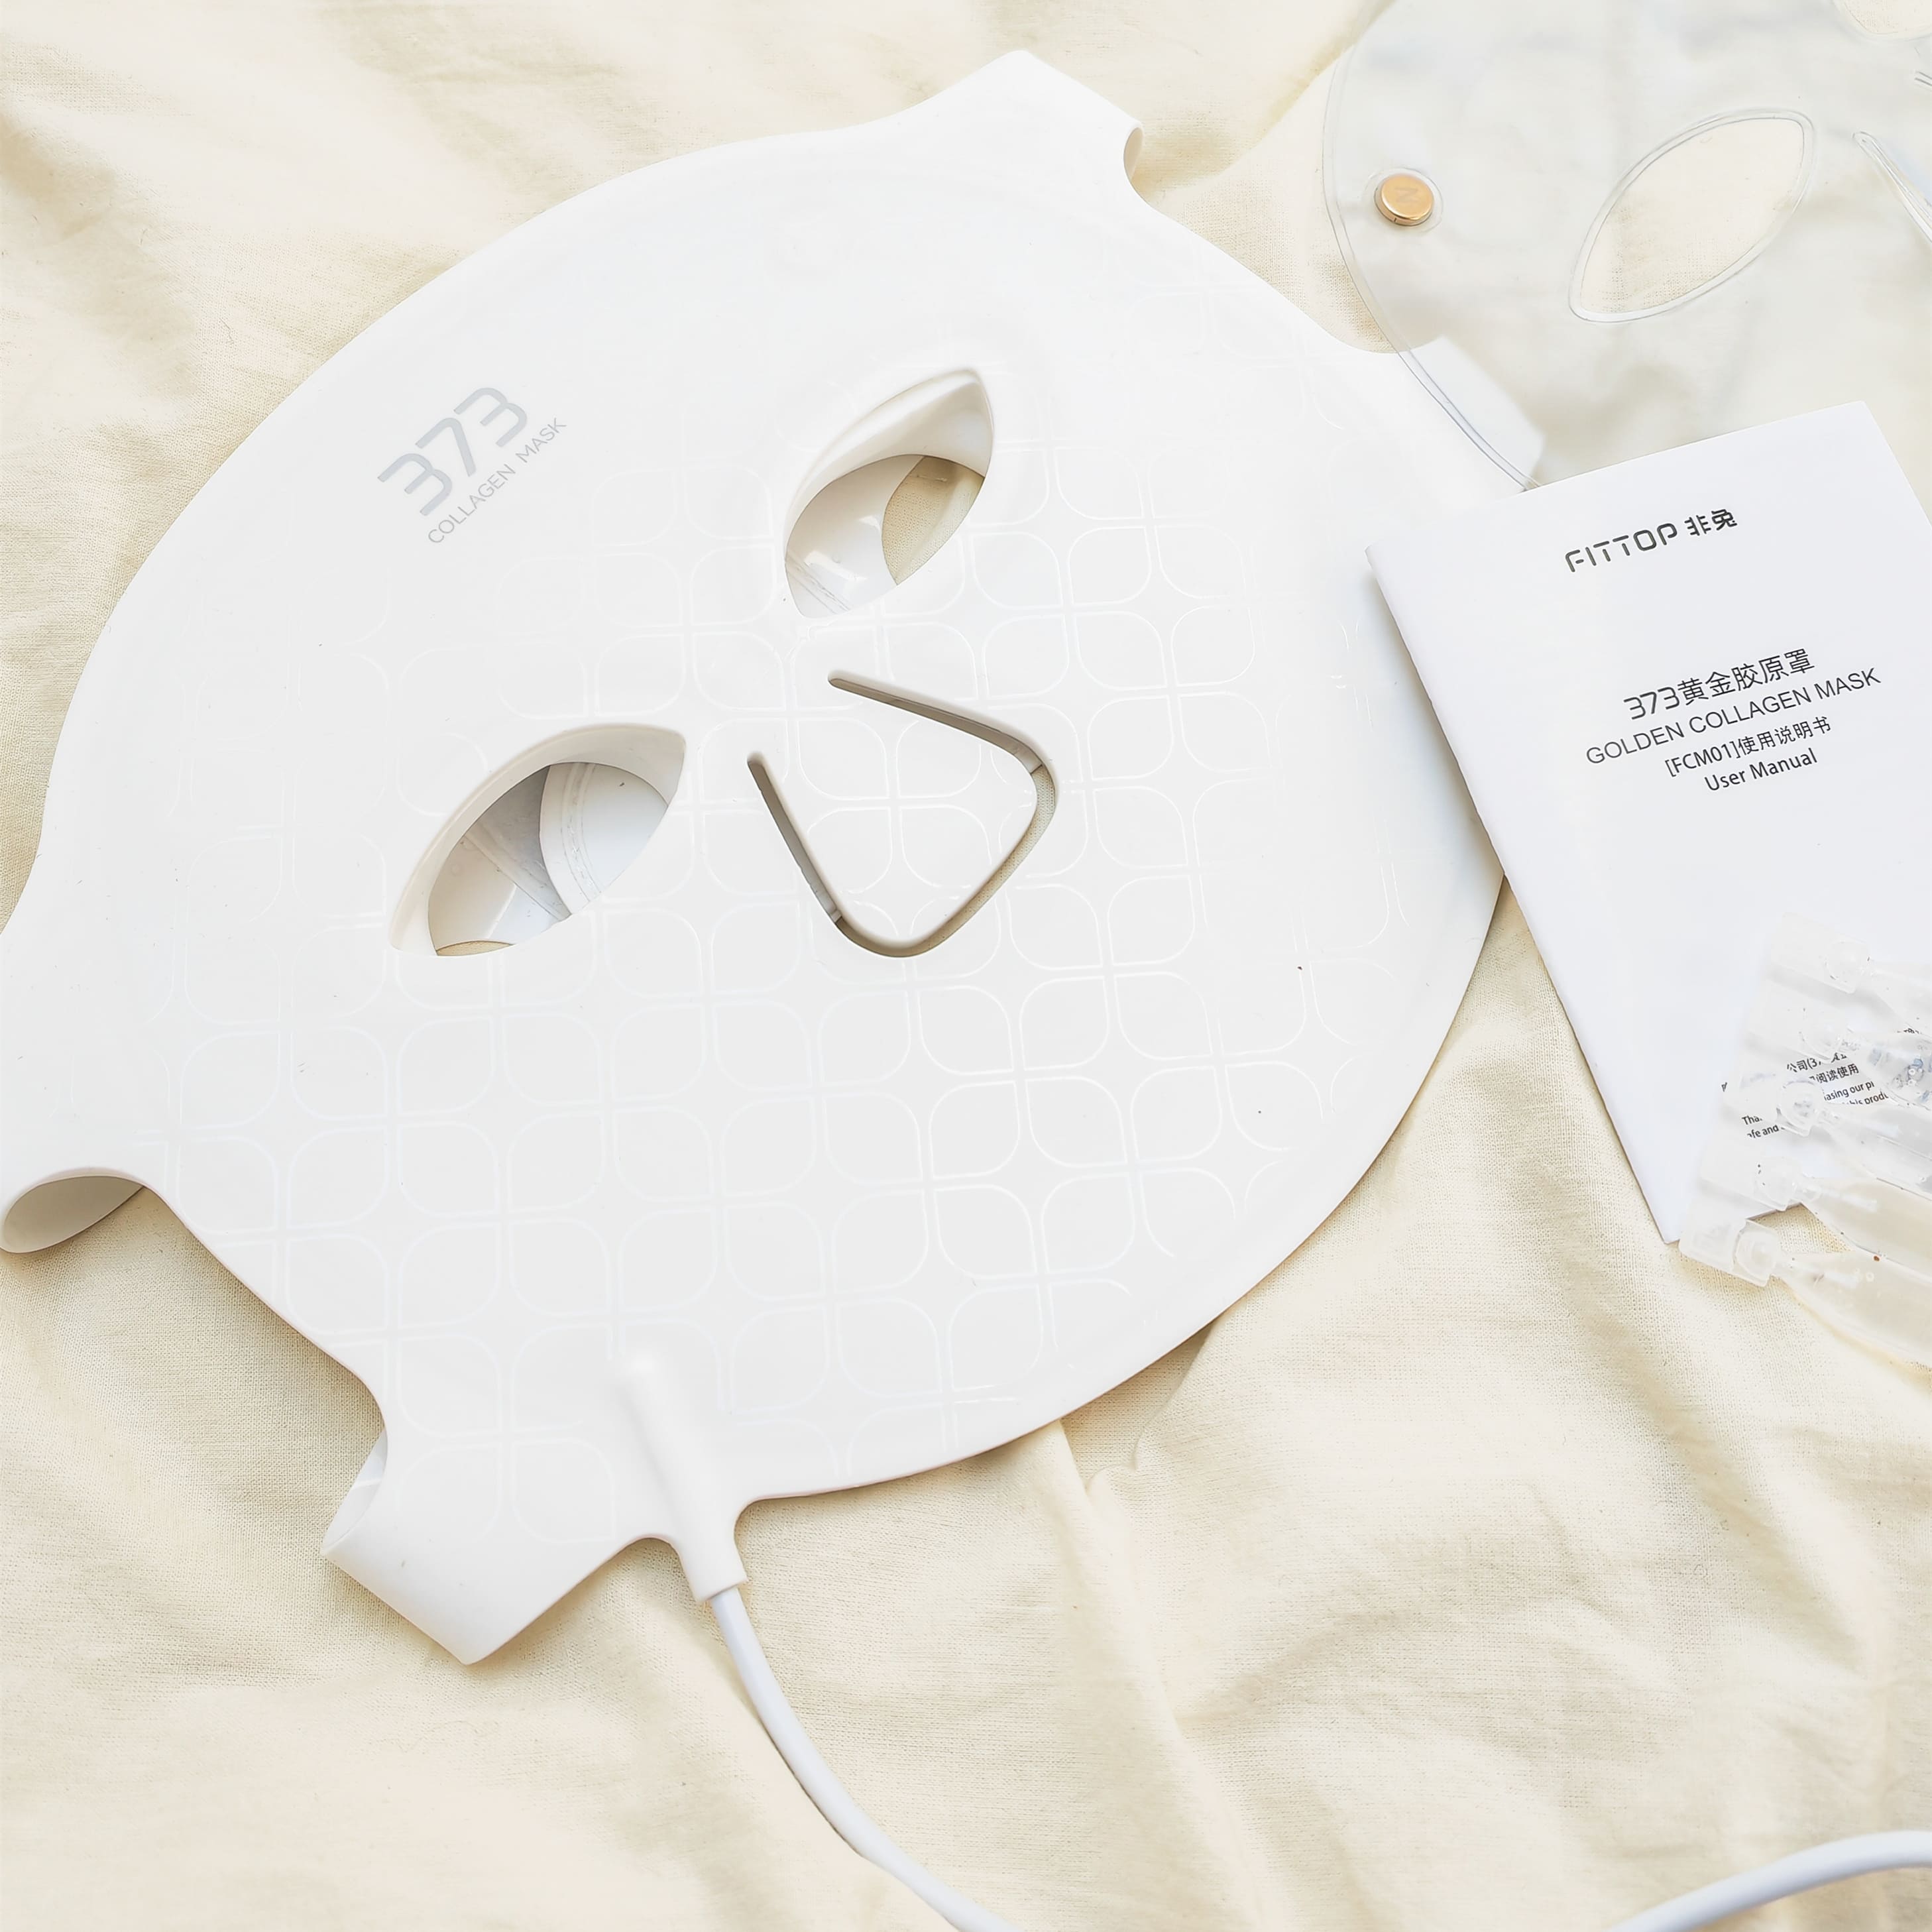 Does LED Light Therapy Mask Really Work?